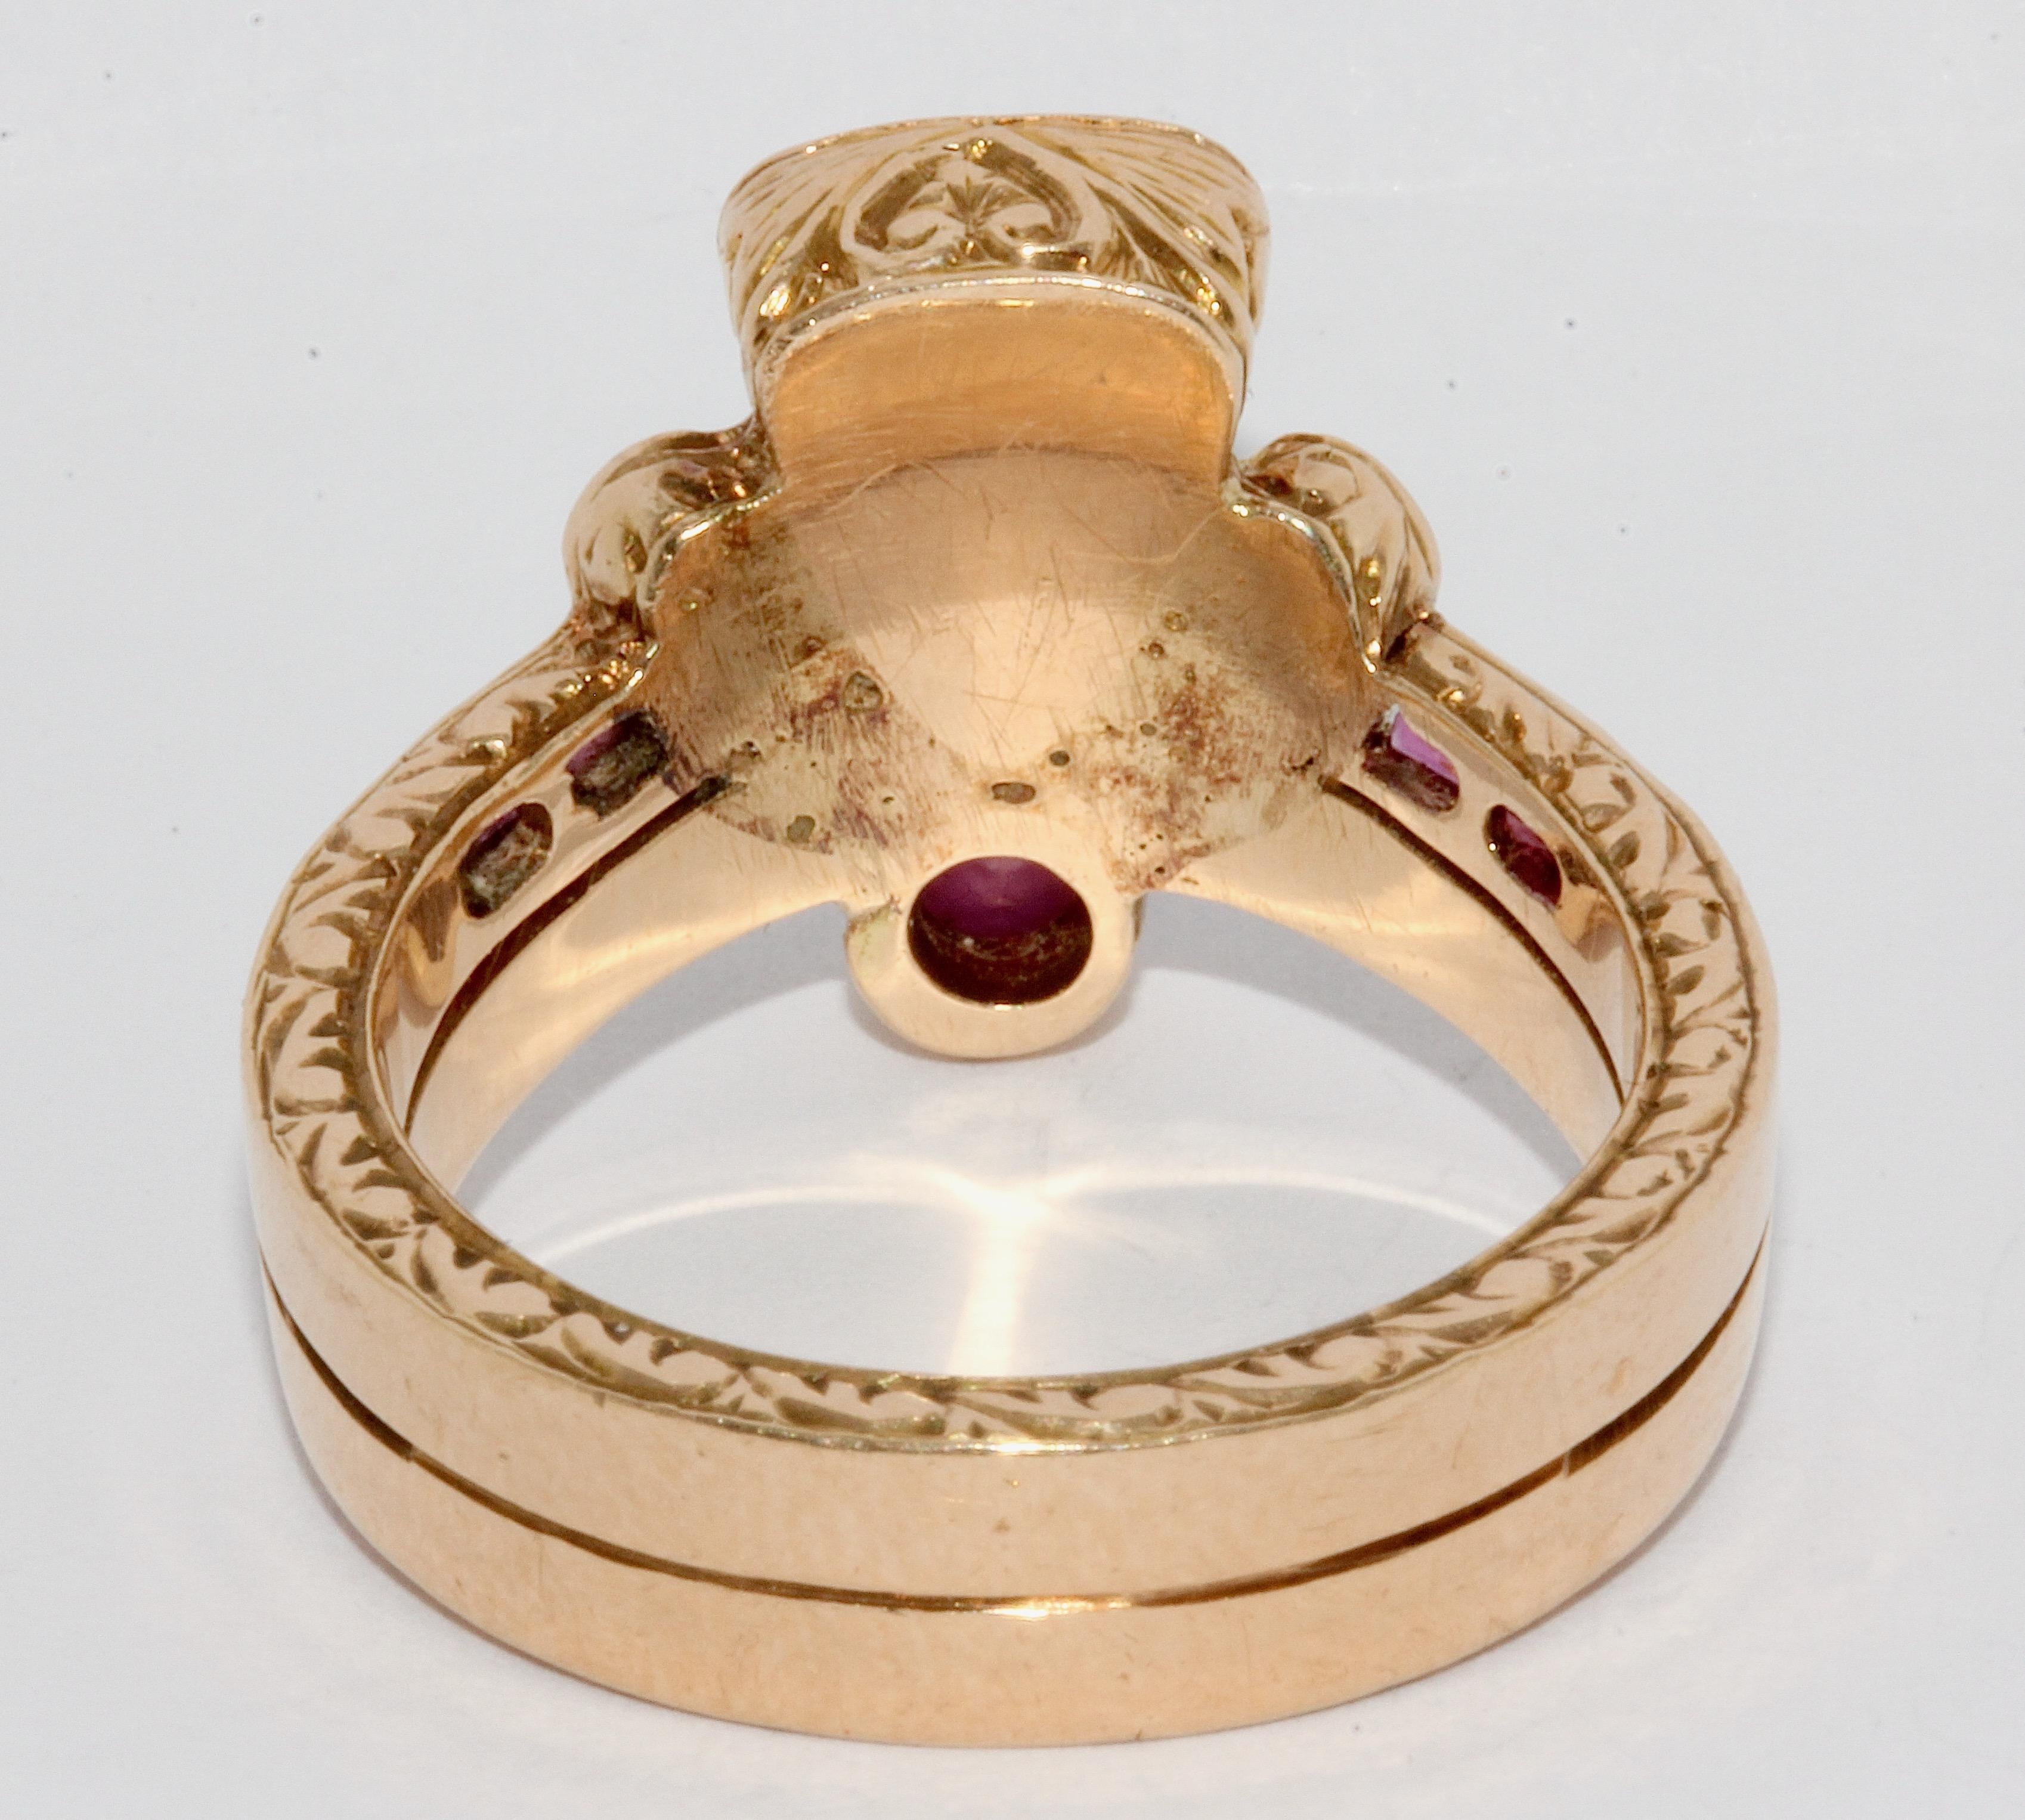 Victorian Antique, Royal Gold Ring with Rose Cut Trillion Diamond, Rubies and Ornaments For Sale